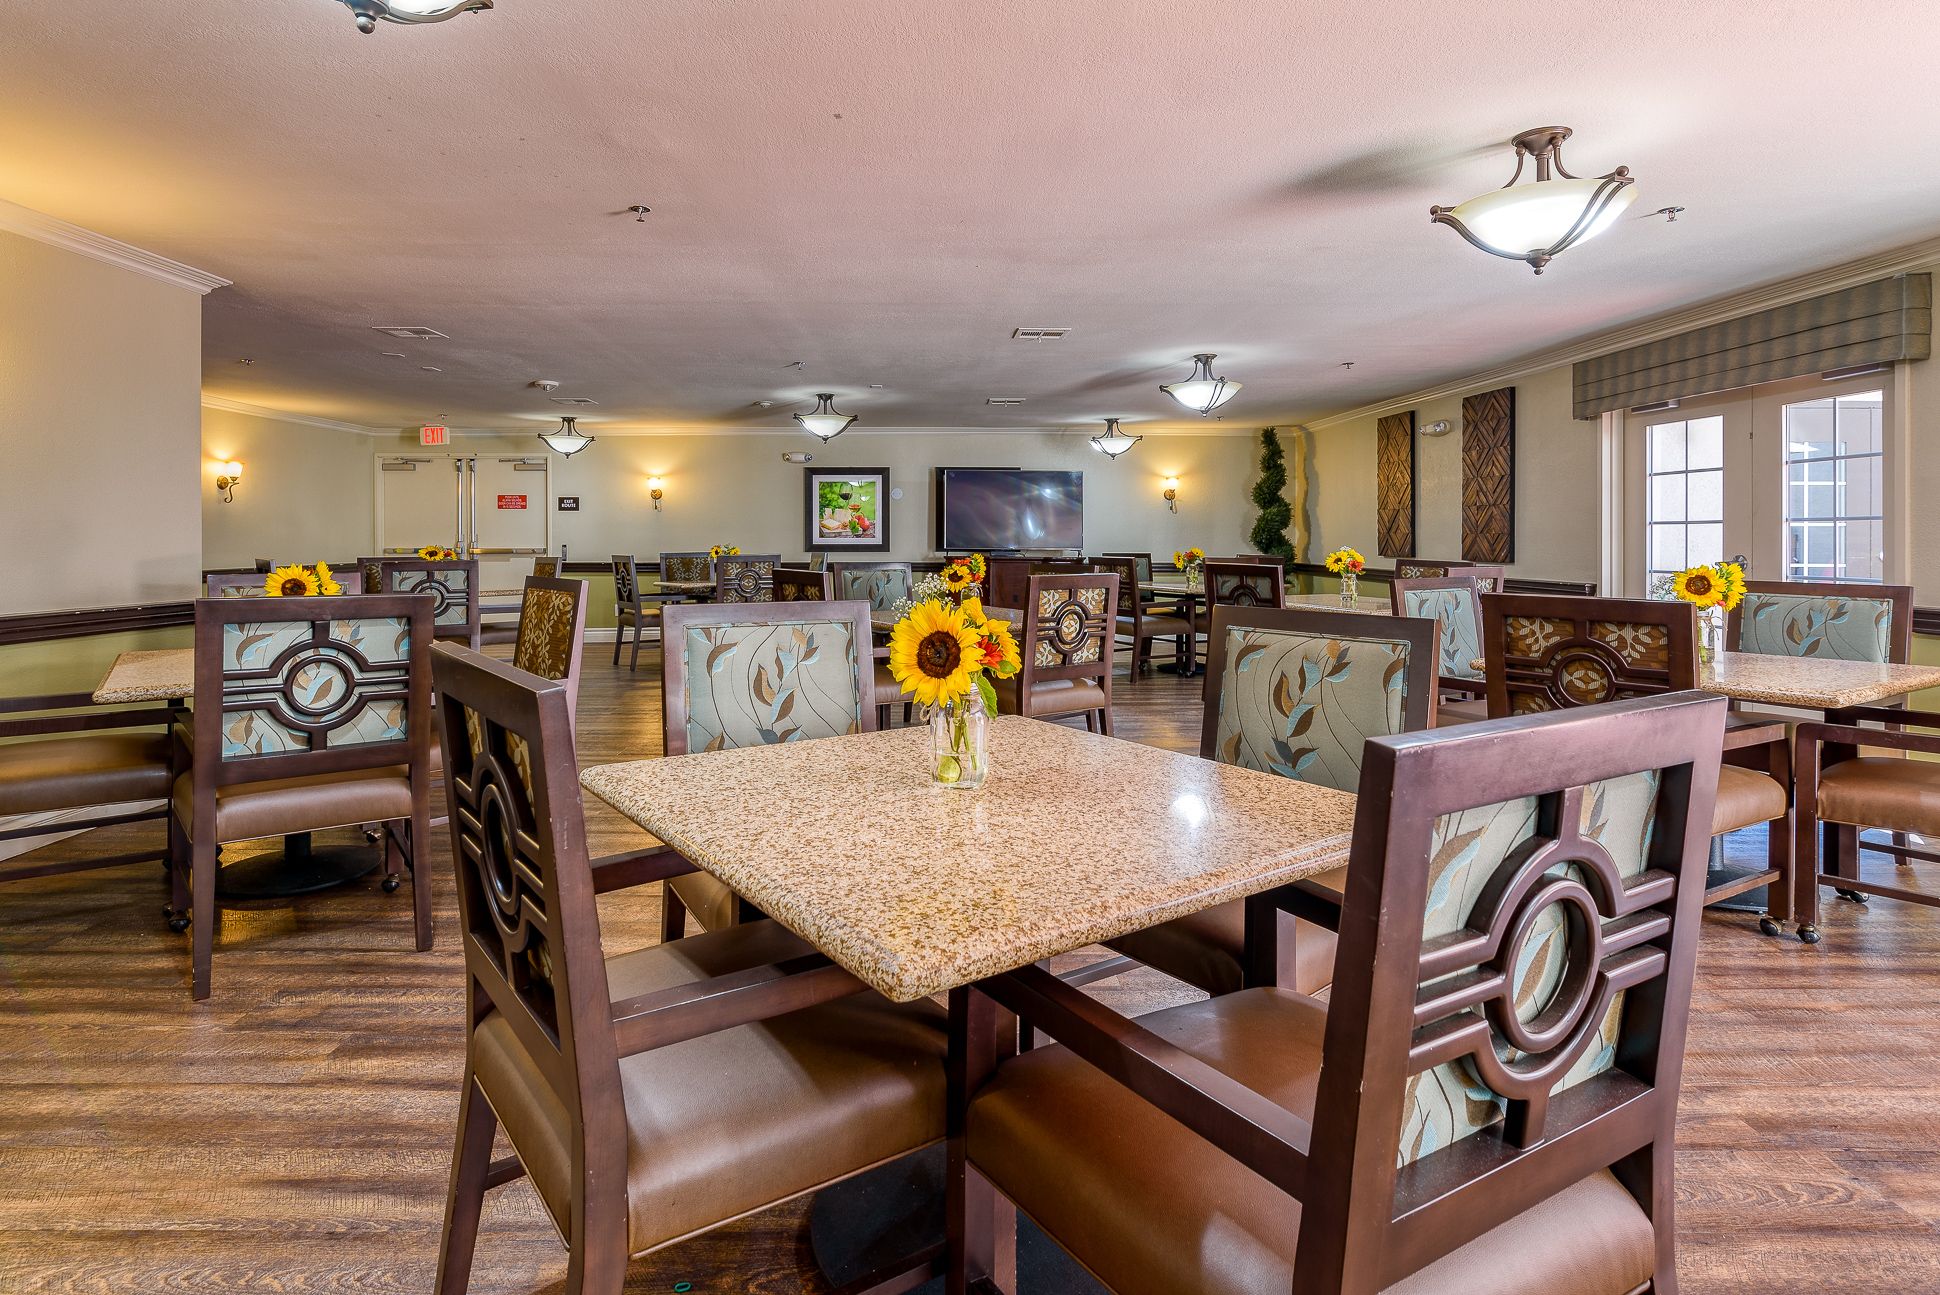 Interior view of Pacifica Senior Living South Coast with hardwood floors, dining area, and art decor.